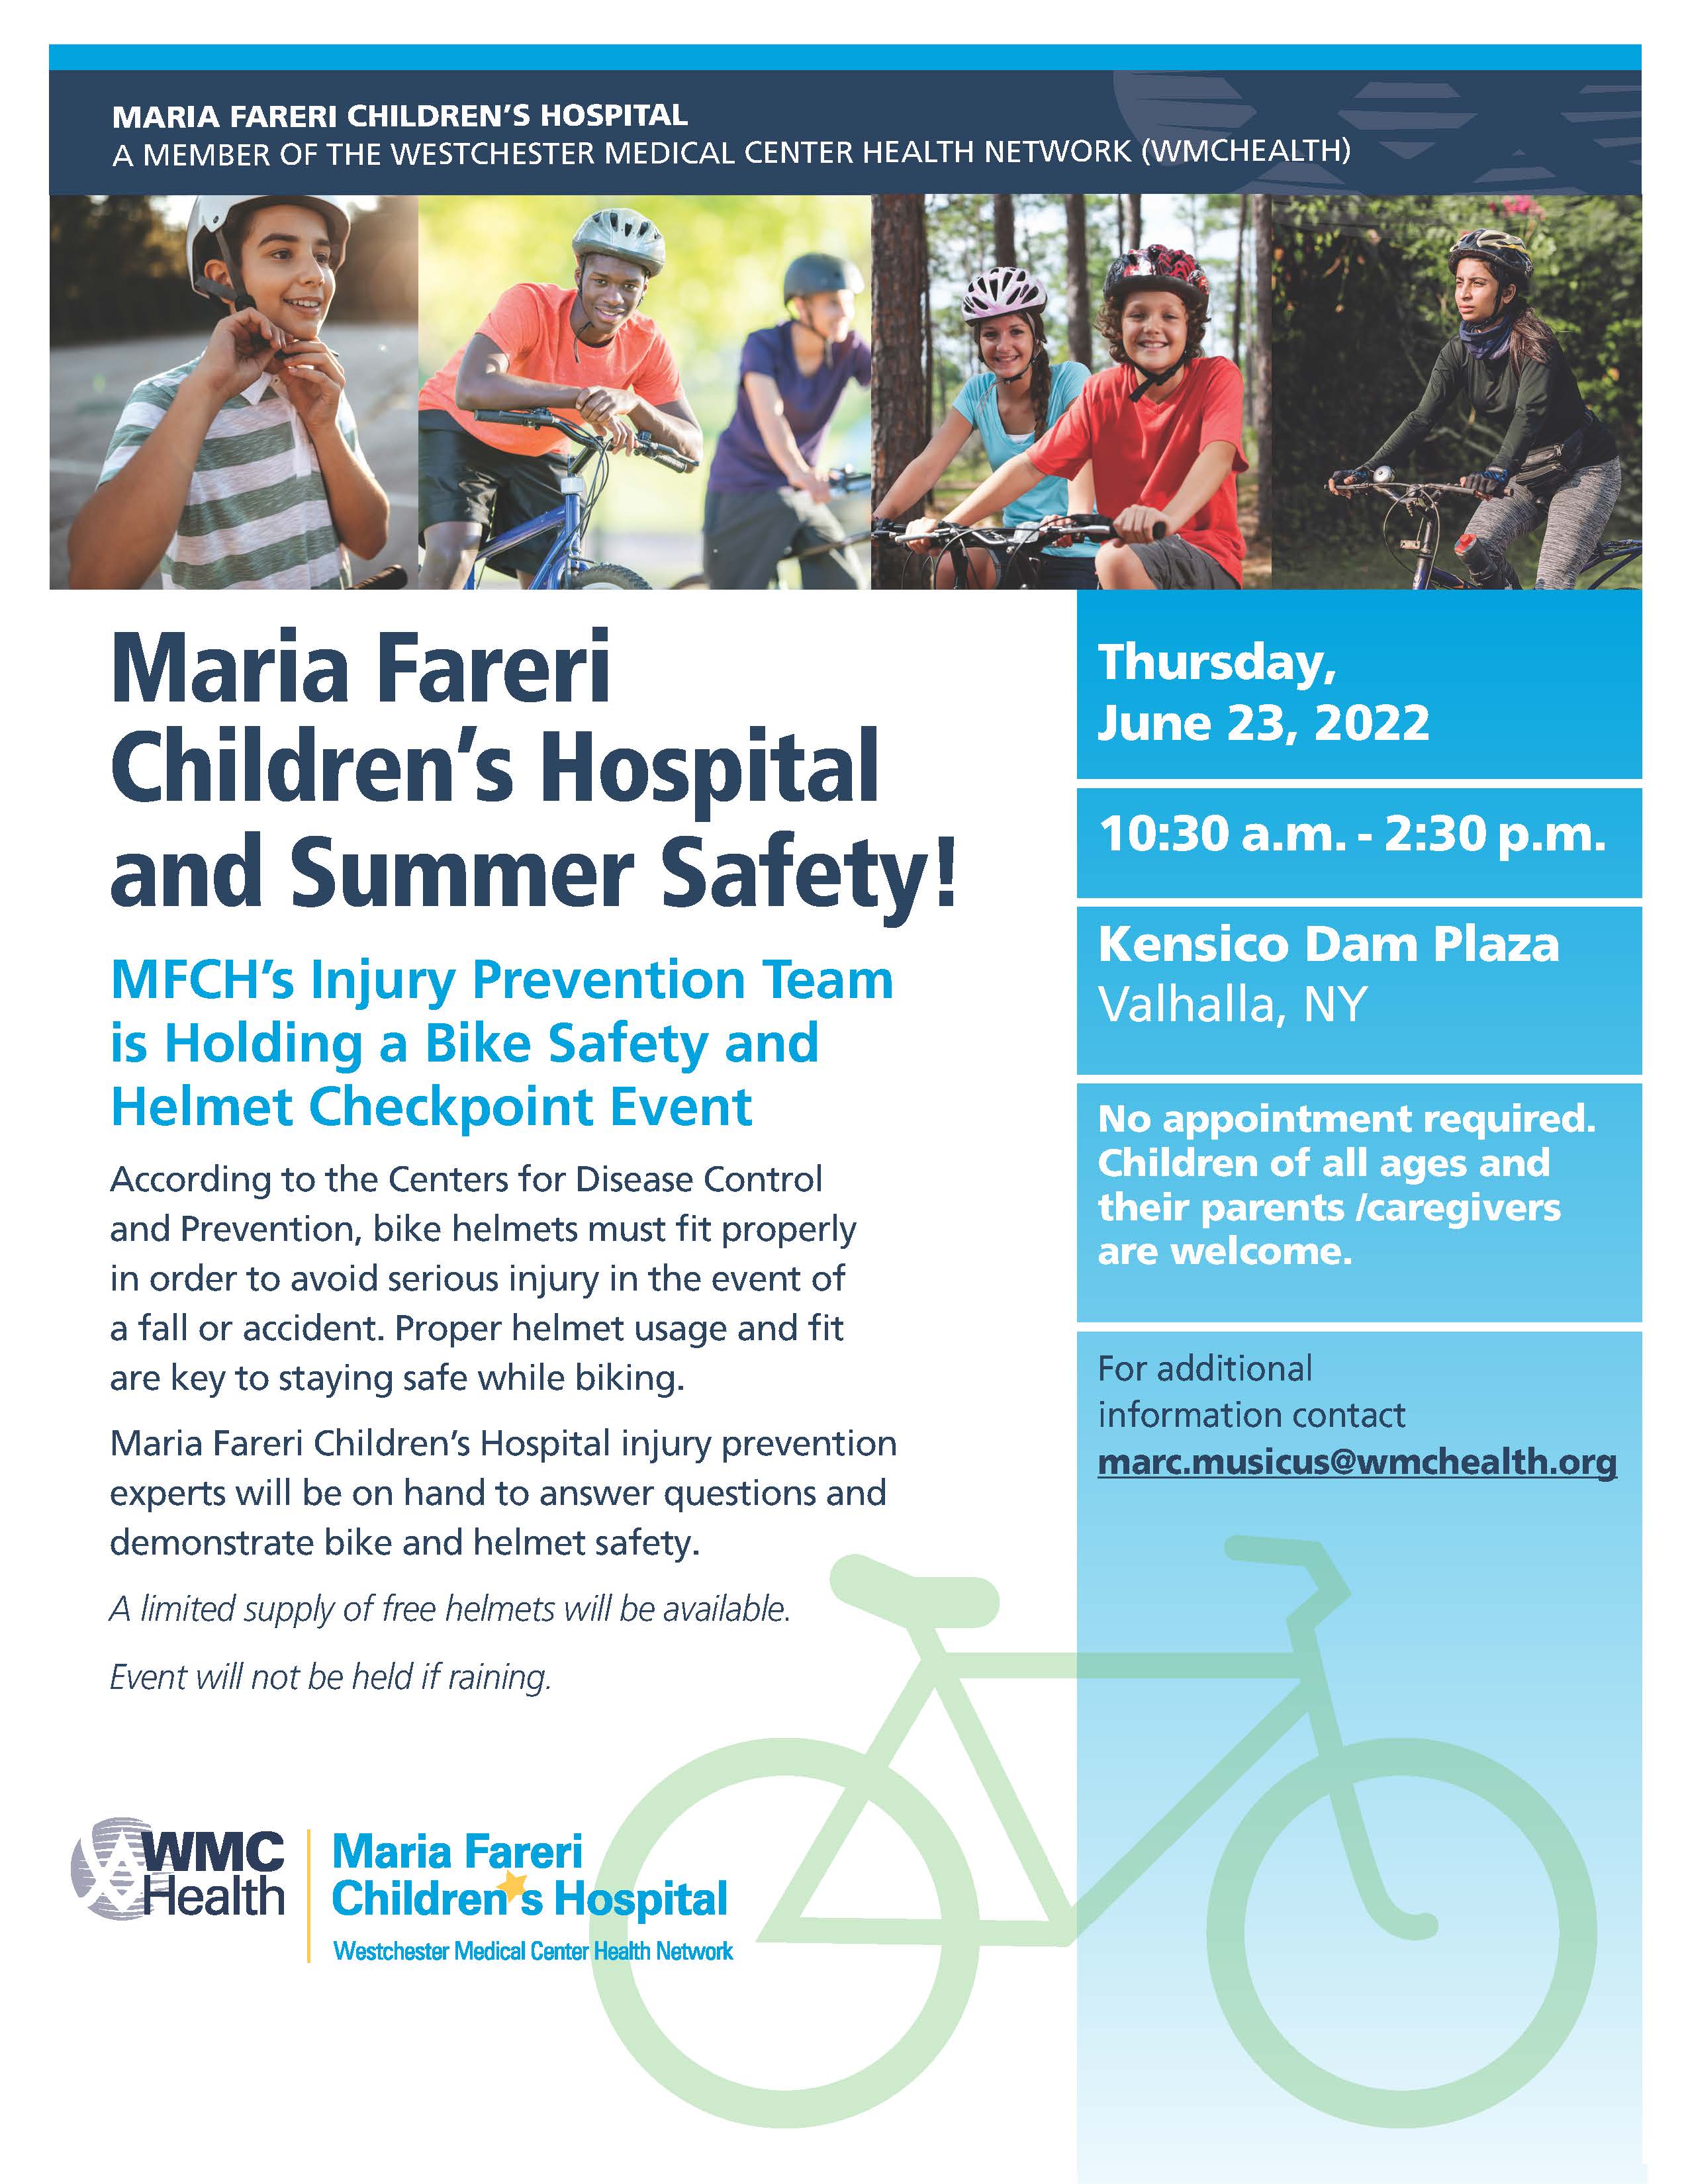 Maria Fareri Children’s Hospital injury prevention experts will be on hand to answer questions and demonstrate bike and helmet safety. No appointment required. Children of all ages and their parents /caregivers are welcome. Kensico Dam Plaza, Valhalla, NY